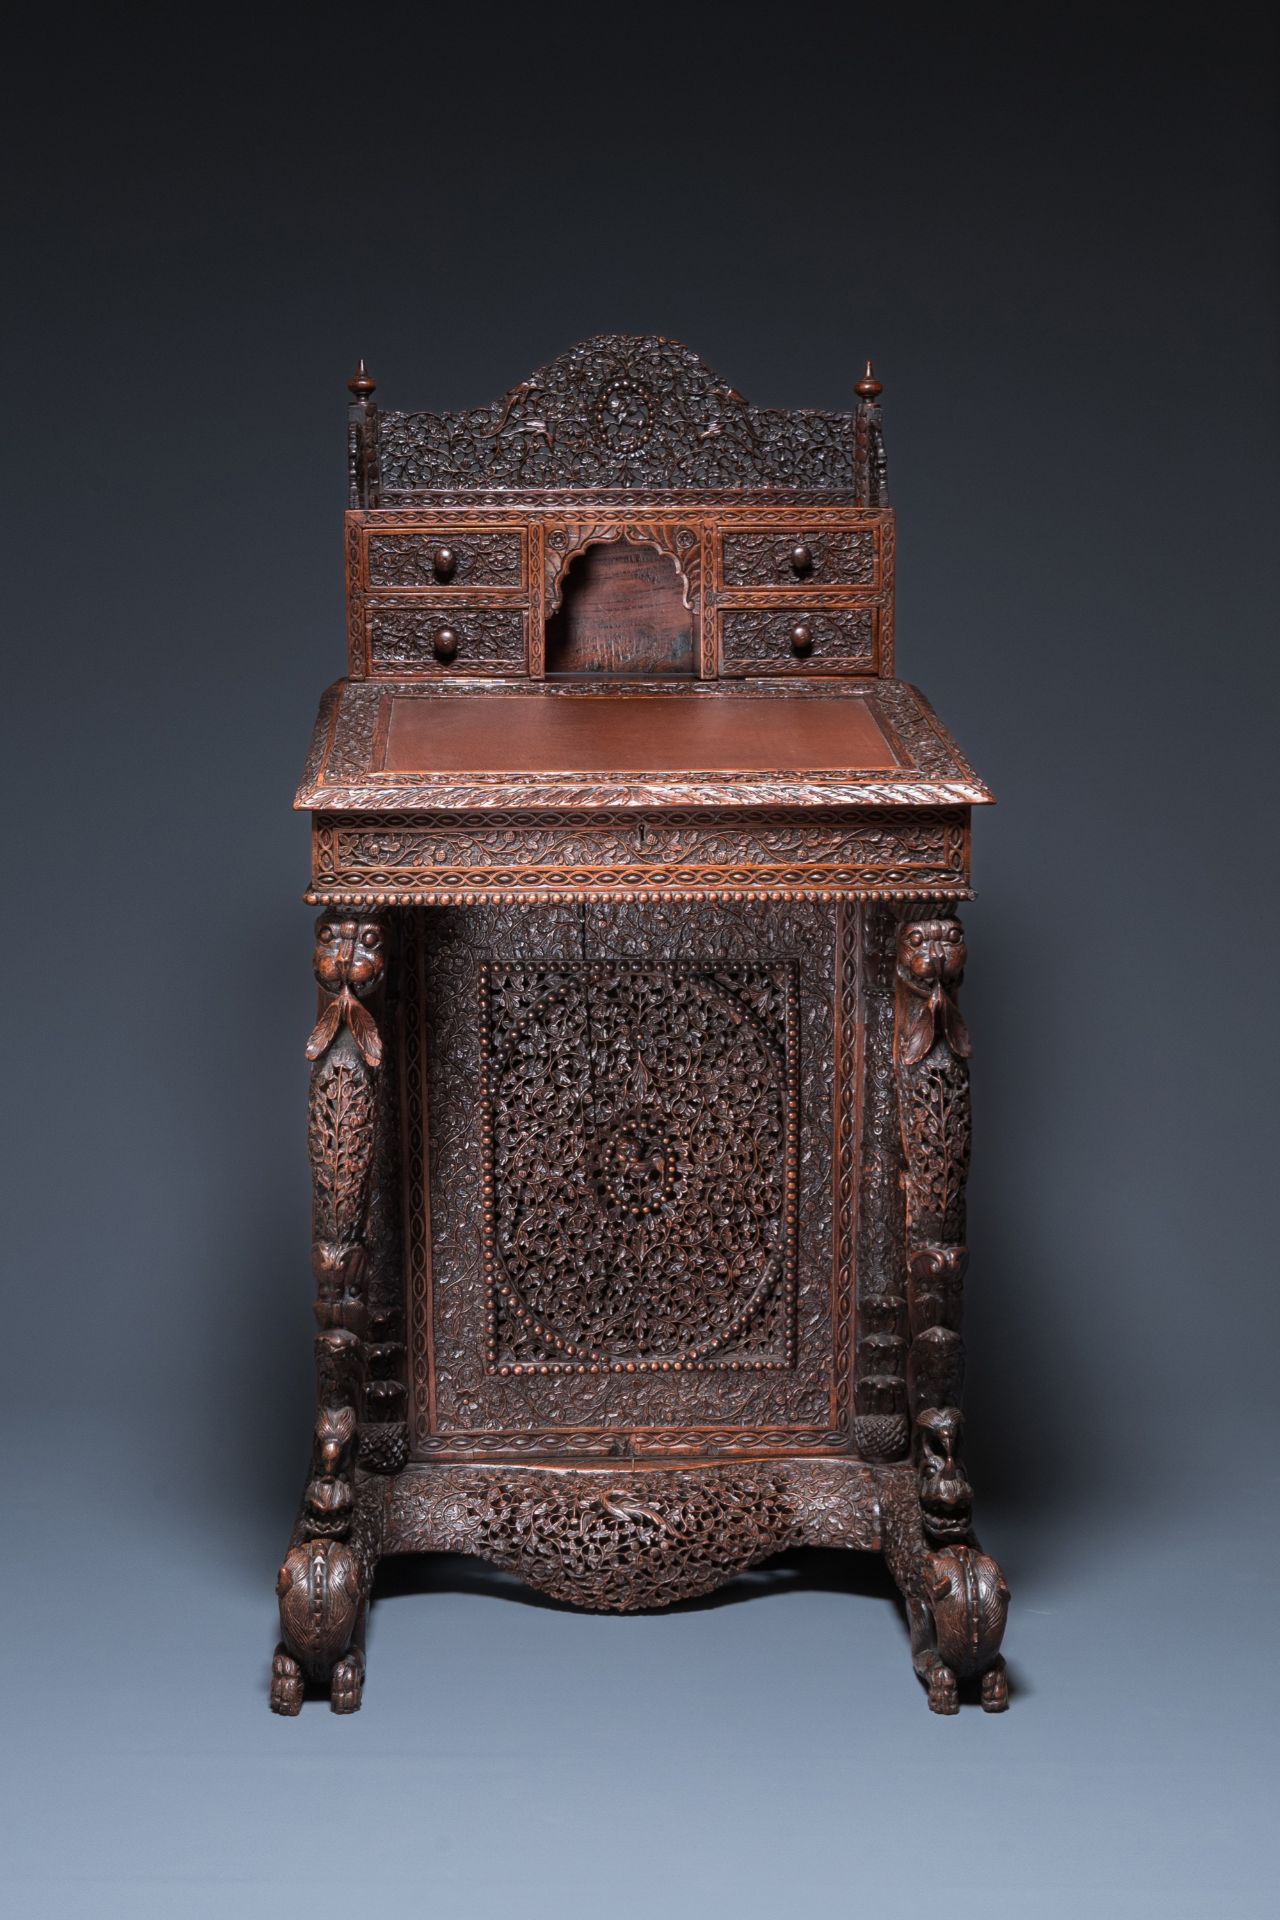 A colonial Anglo-Indian reticulated wooden desk with hidden compartment, 19th C. - Image 2 of 24